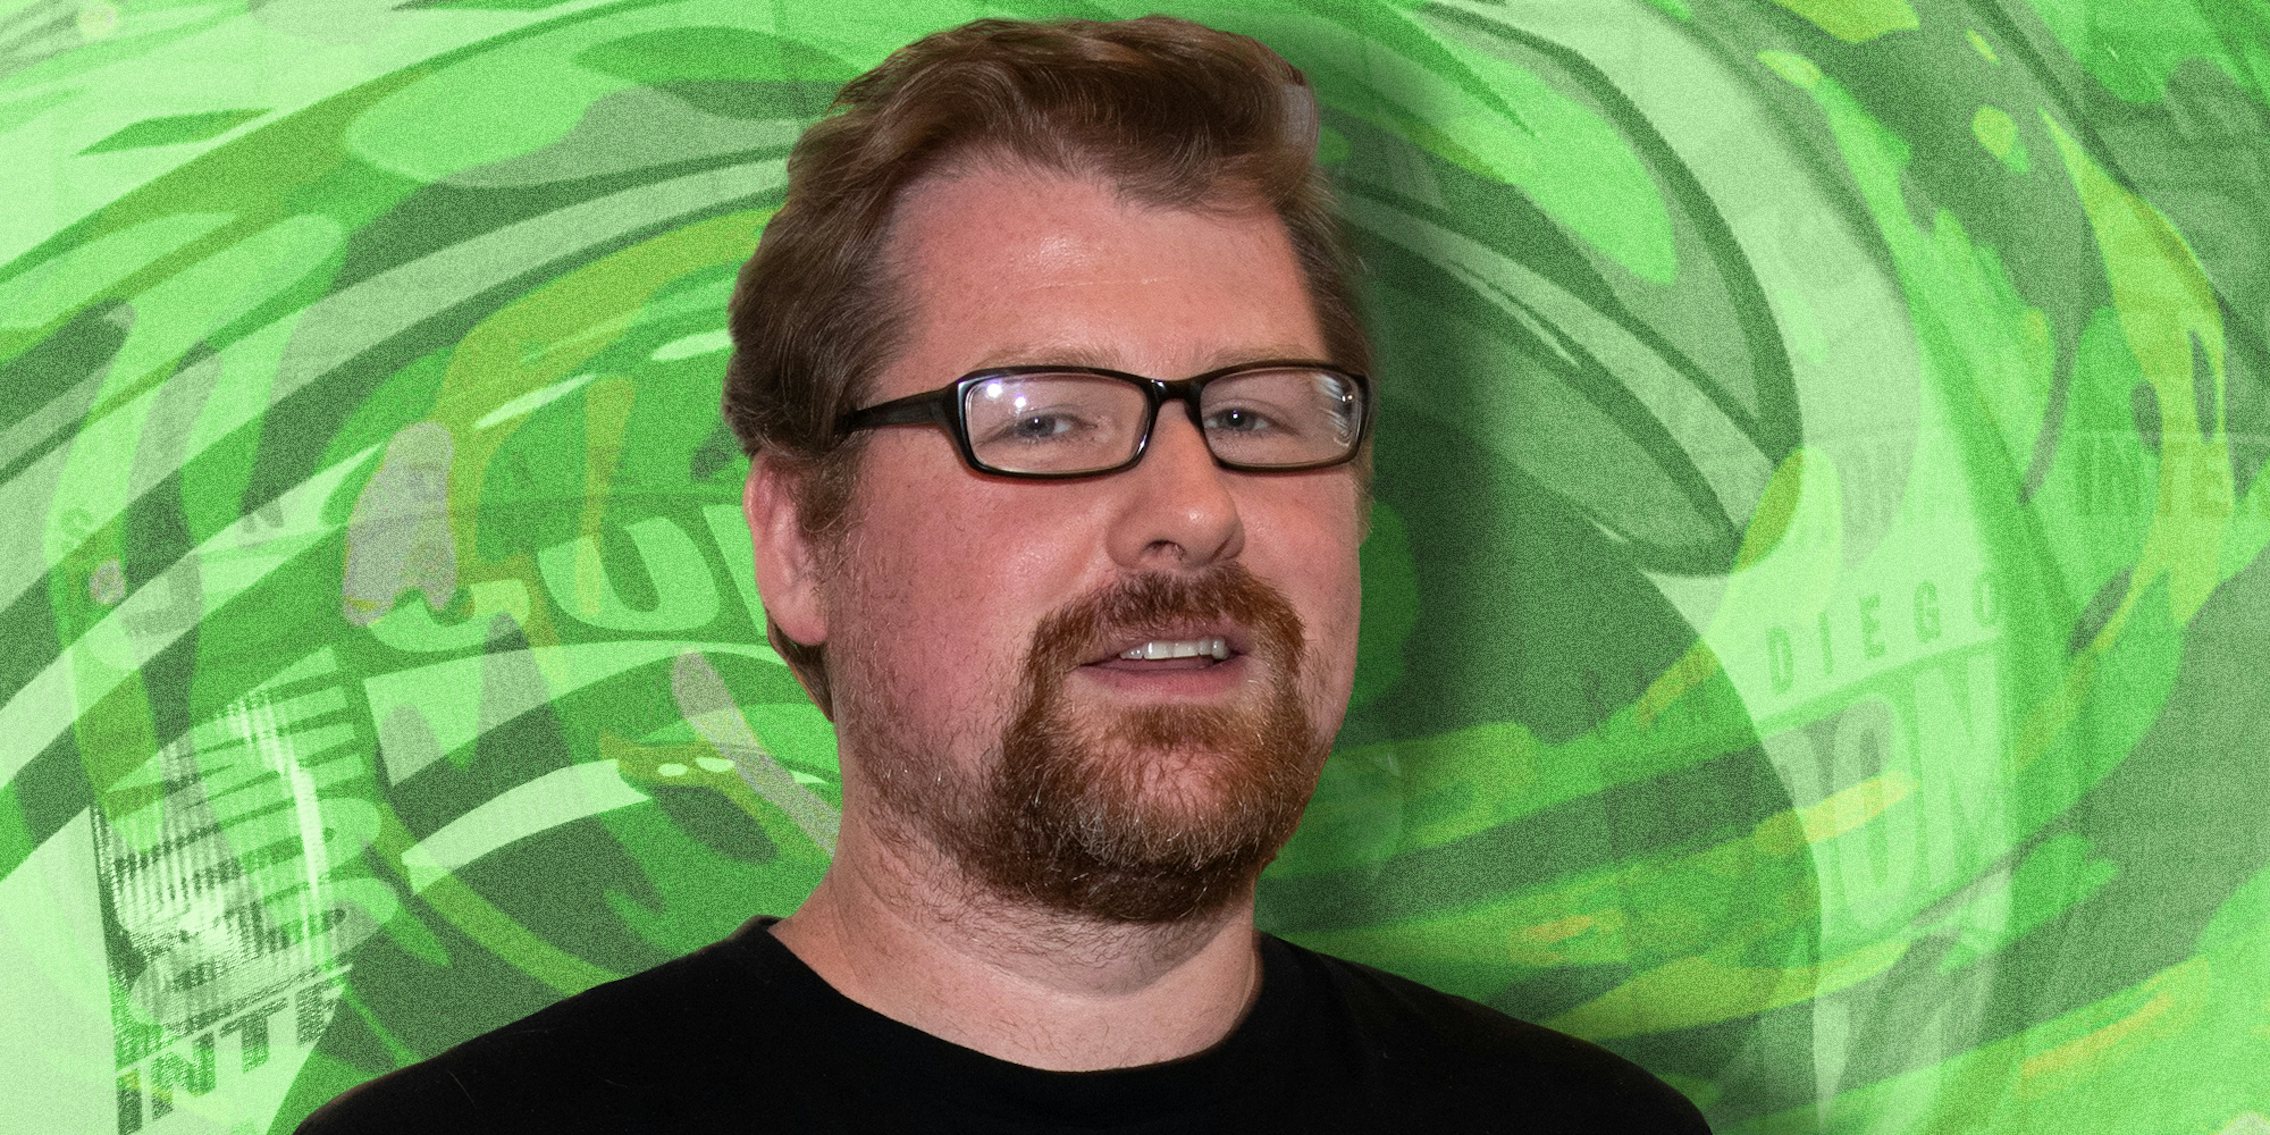 Justin Roiland arrives at Comic Con 2019 for Solar Opposites